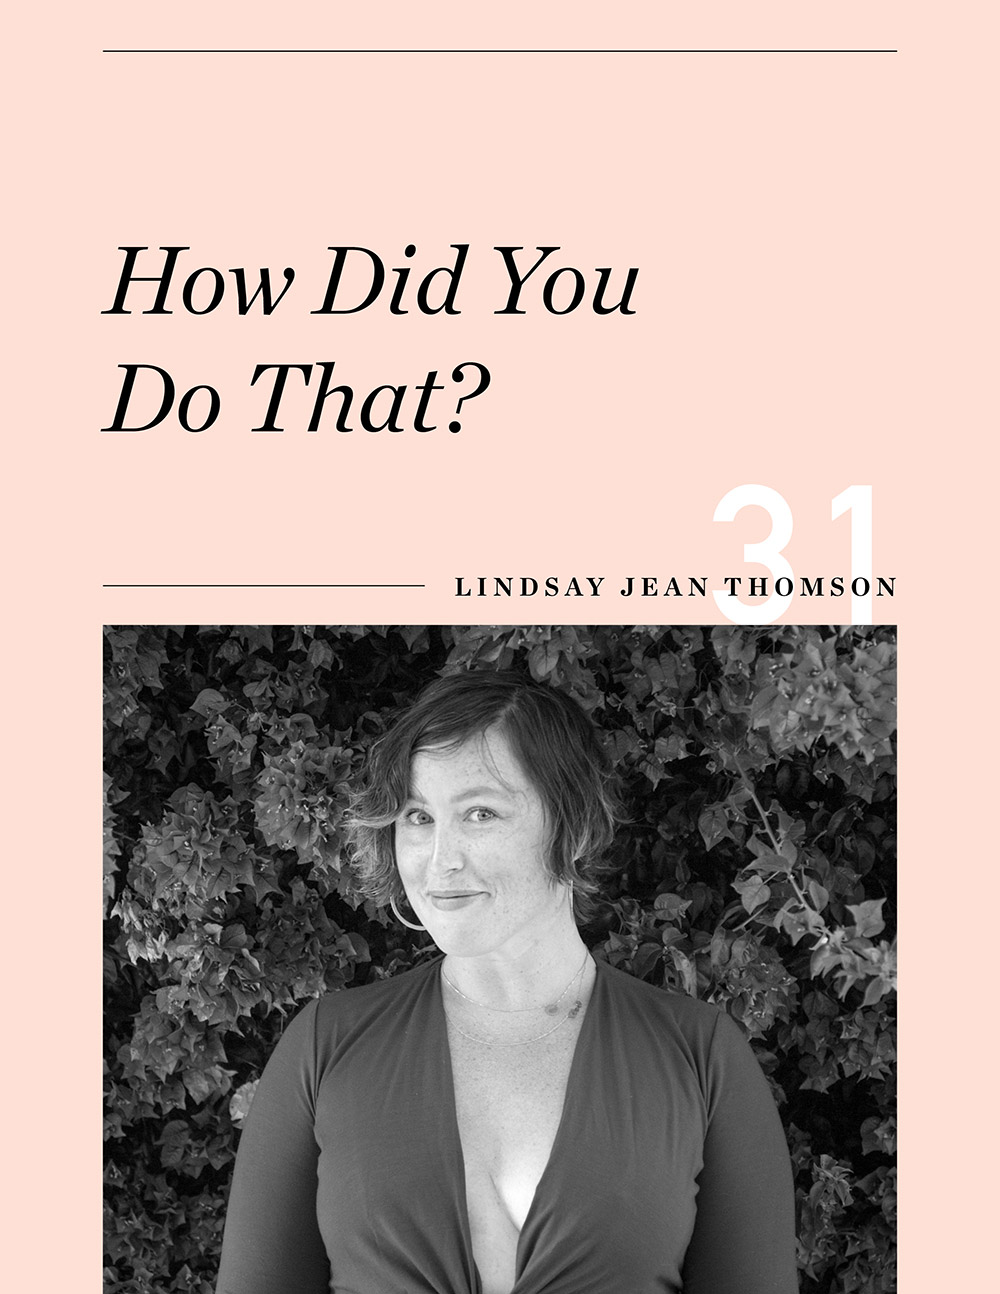 Ellen Fondiler | How Did You Do That: An Interview with Lindsay Jean Thomson